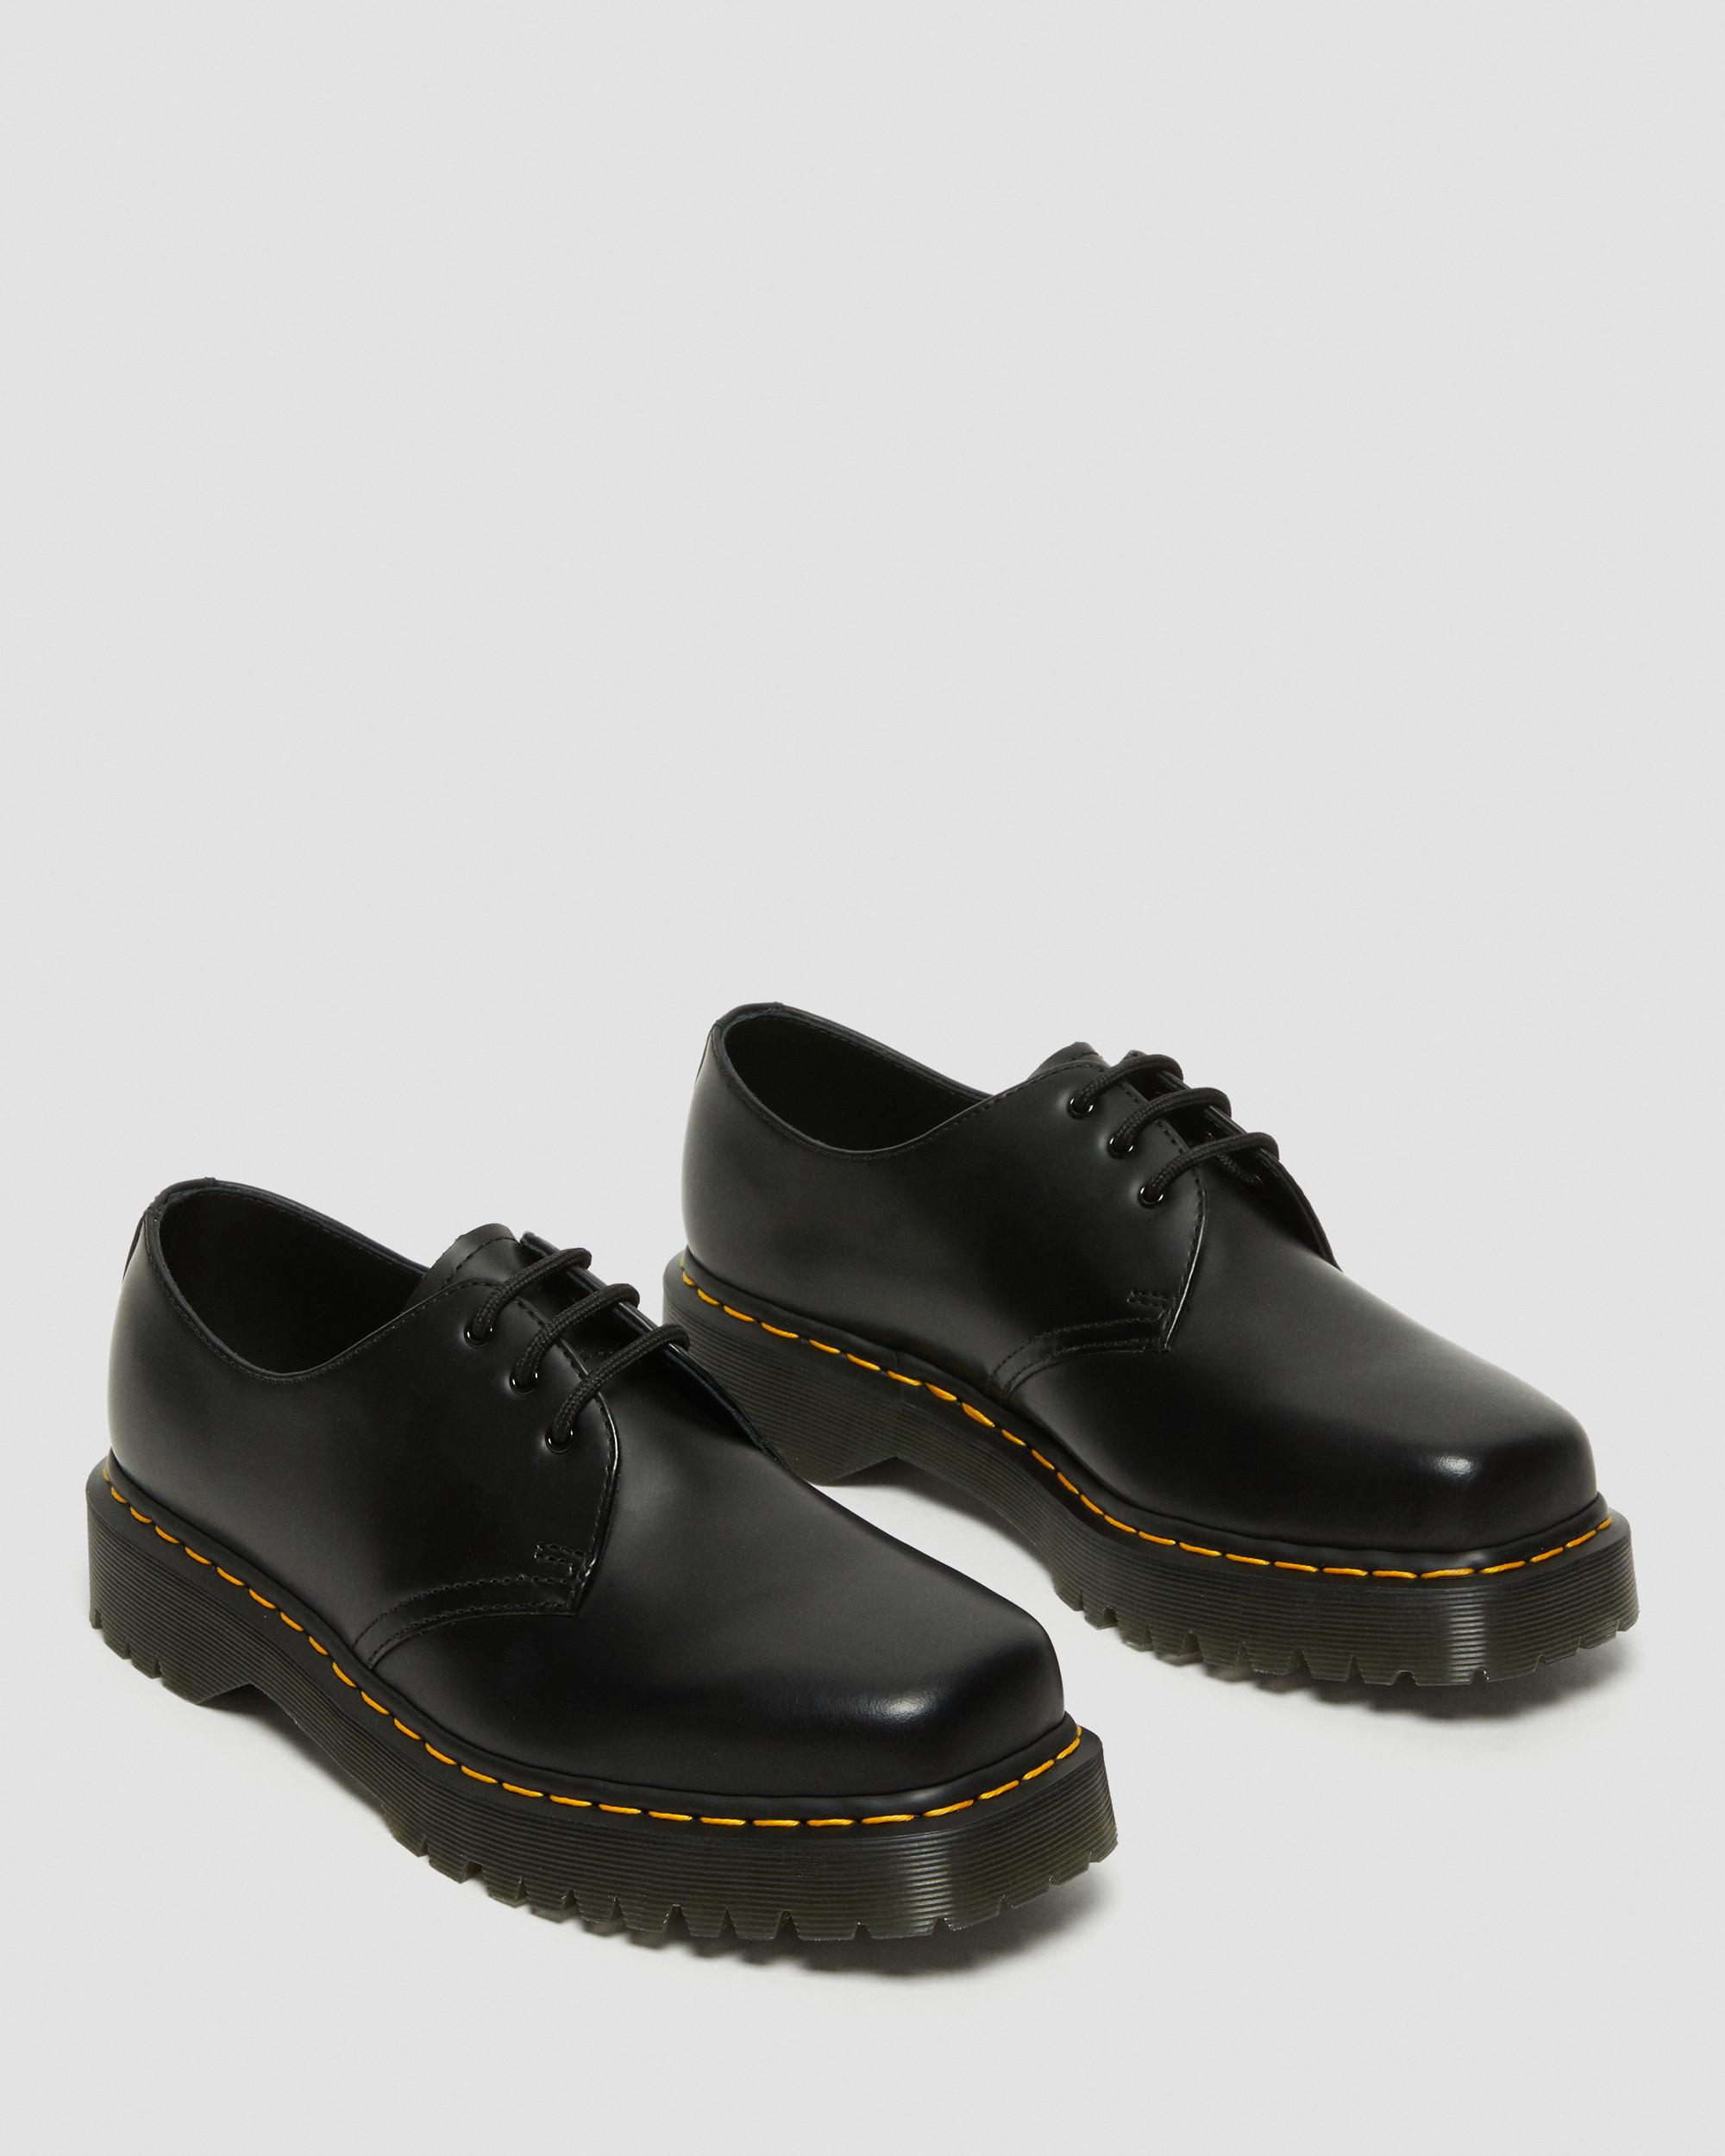 1461 Bex Squared Toe Leather Shoes in Black | Dr. Martens